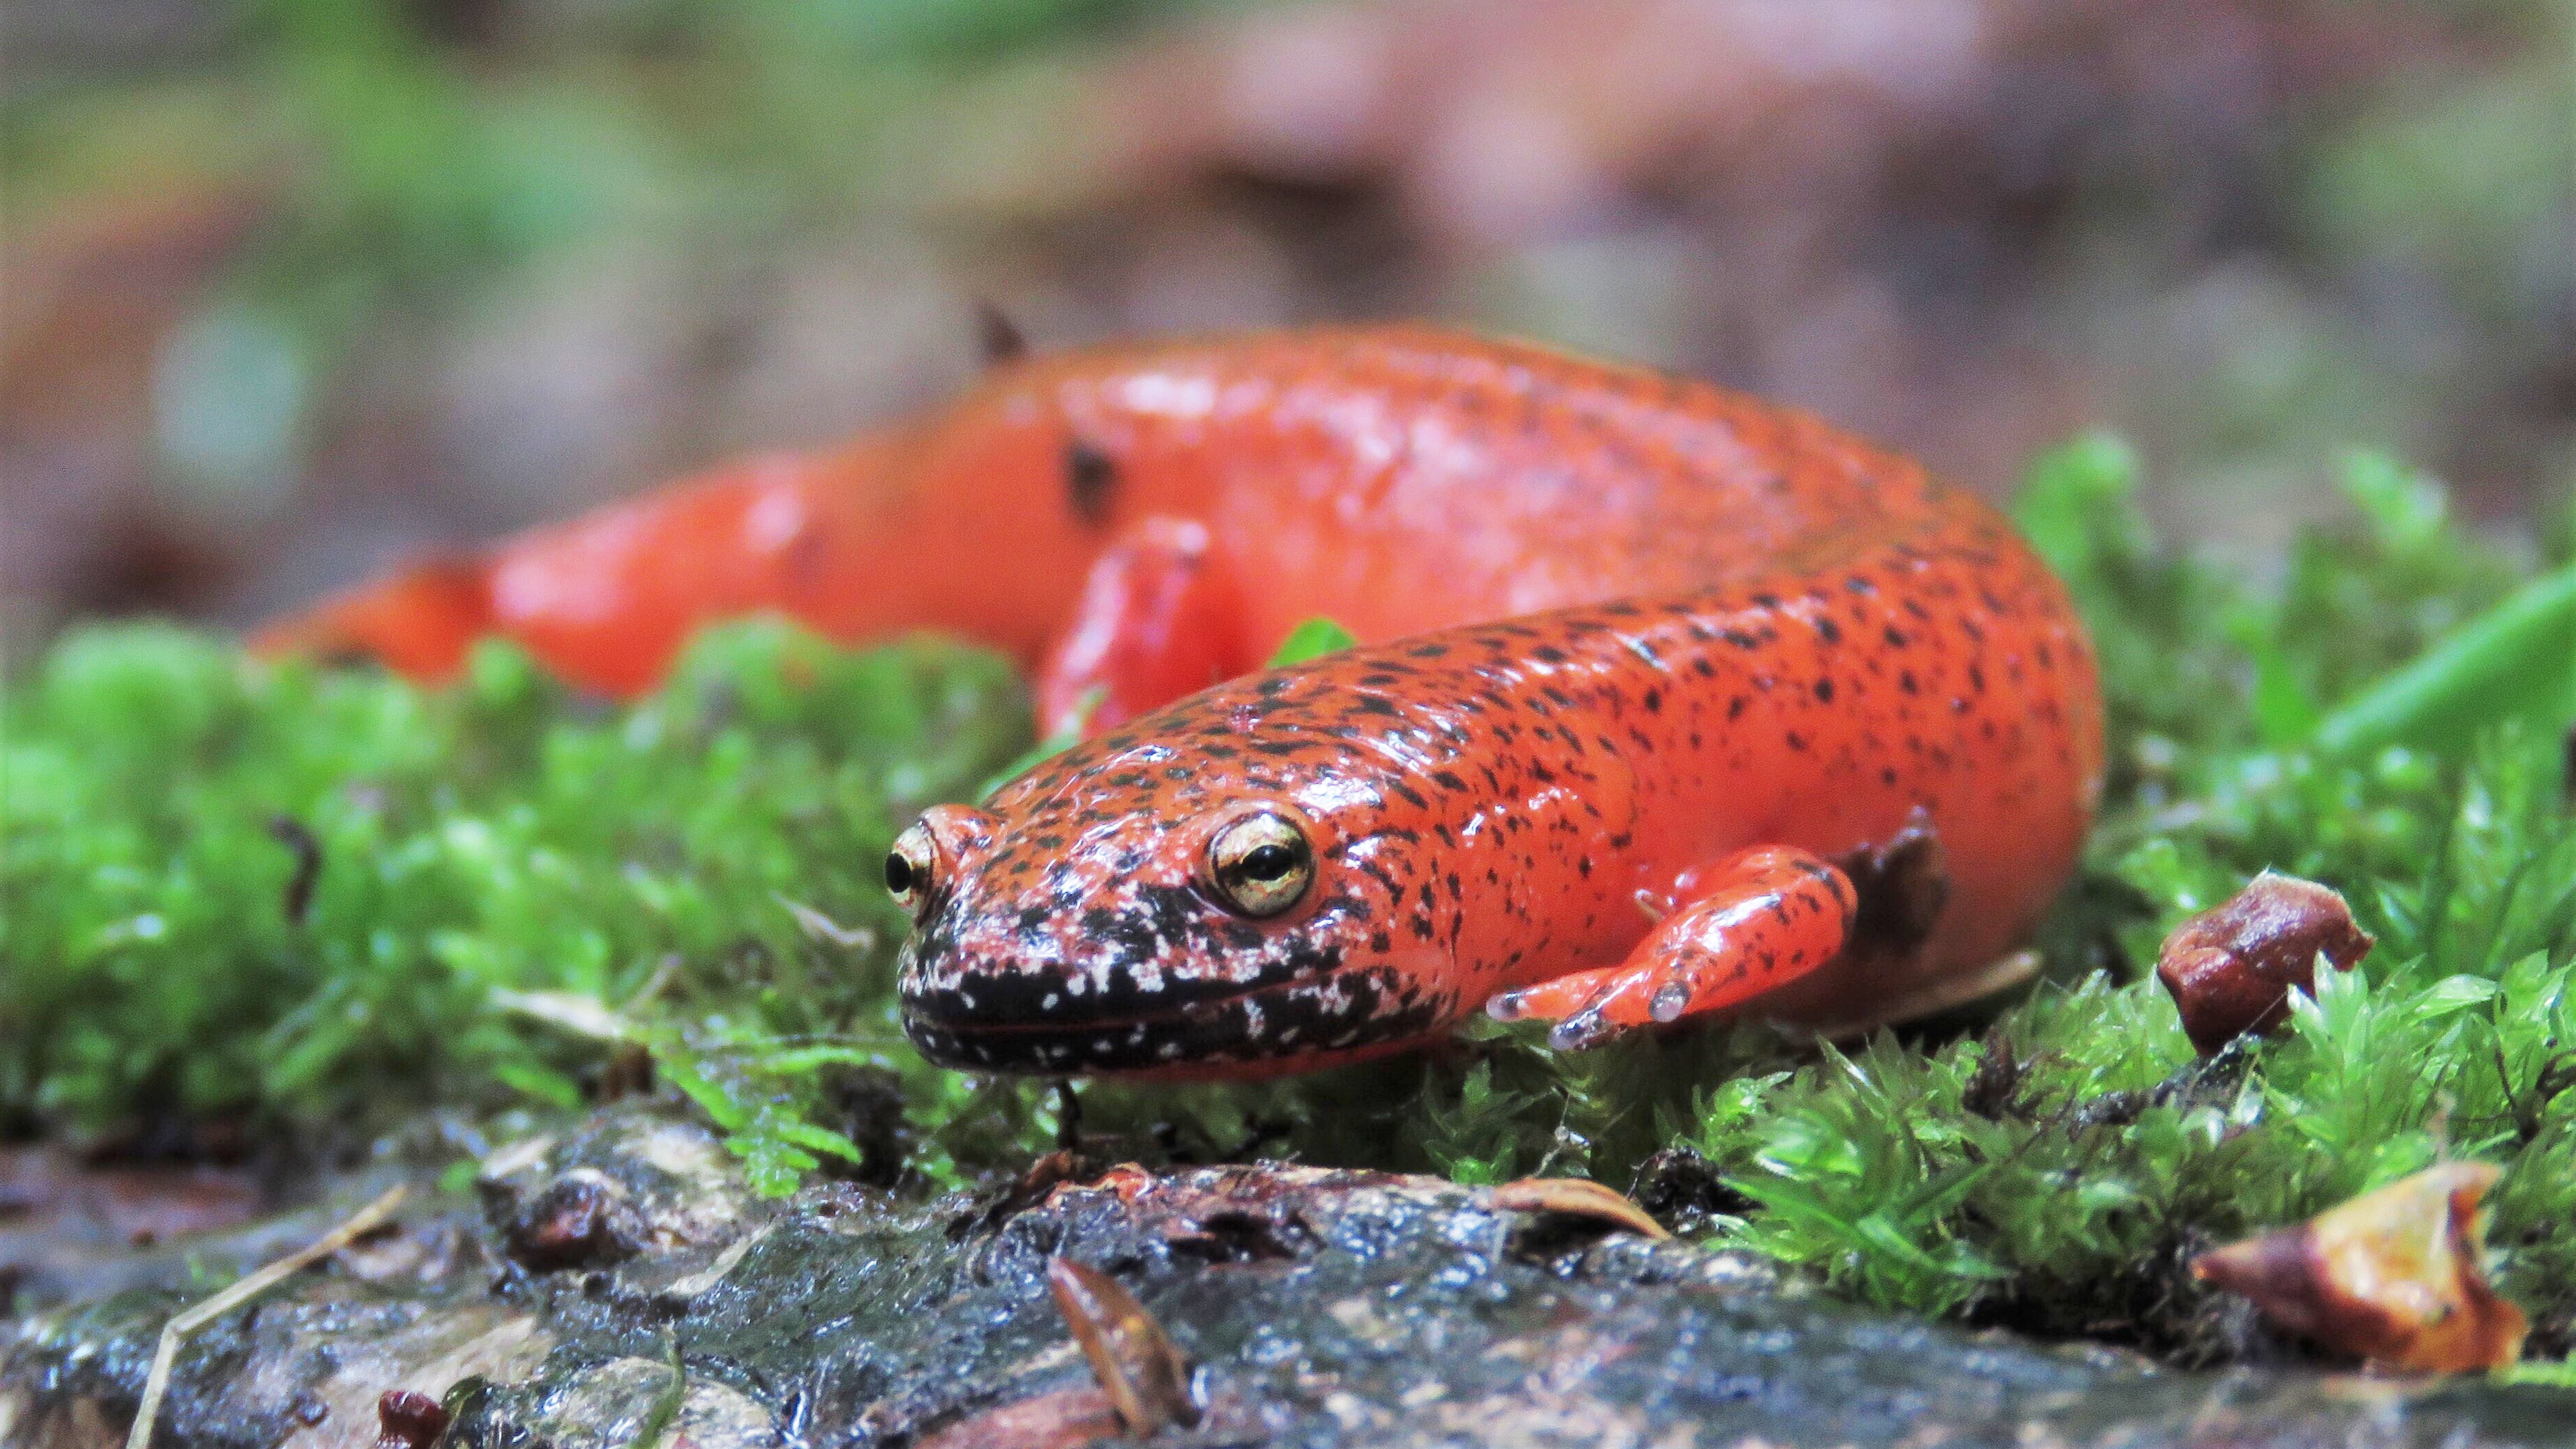 Closeup of a red salamander with a black-colored mouth and chin